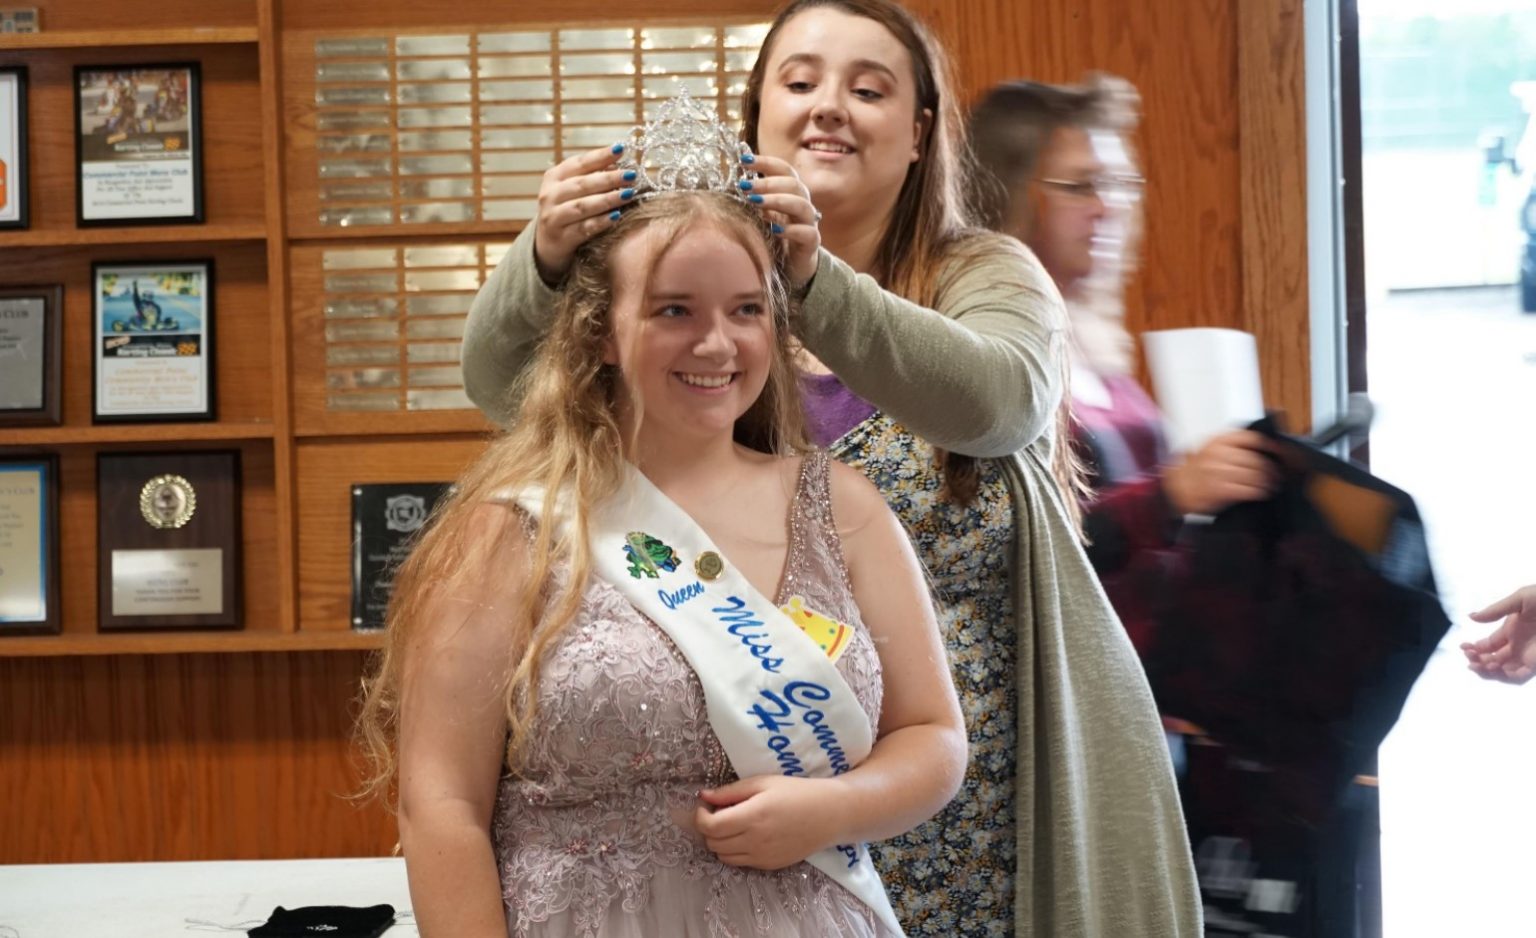 Pickaway County - Commercial Point Homecoming Festival Crowns Queen ...